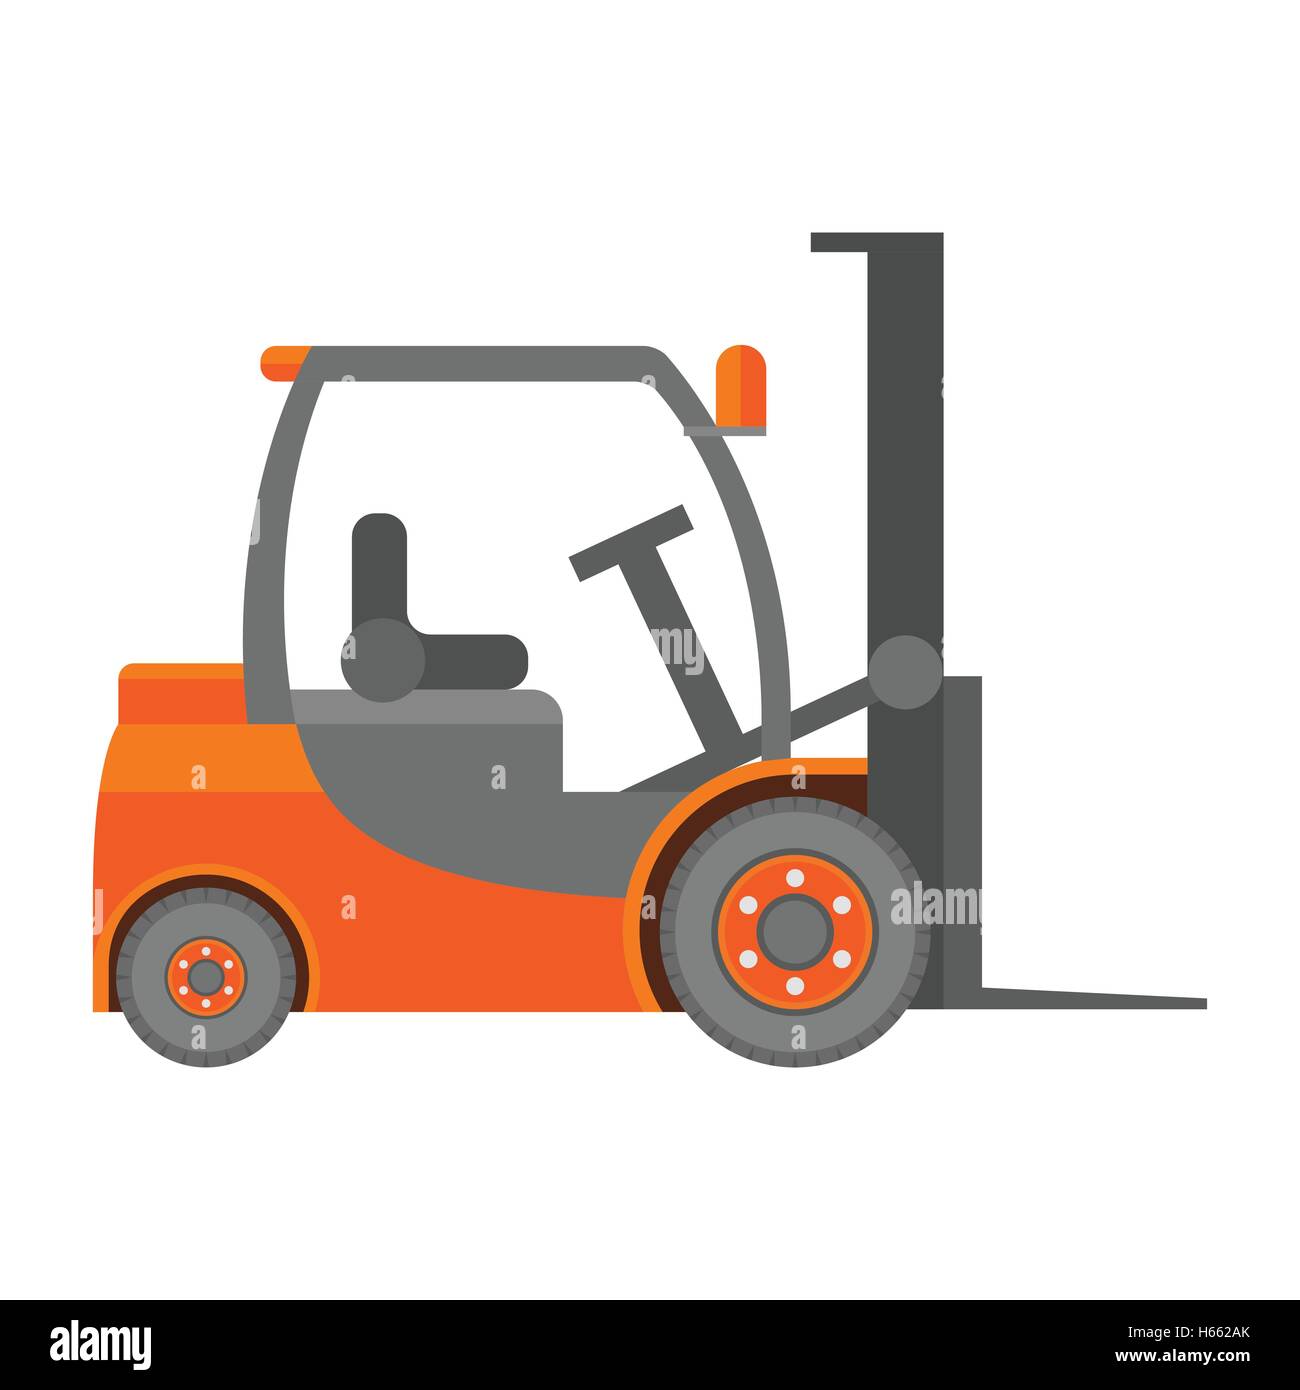 Forklift truck icon Stock Vector